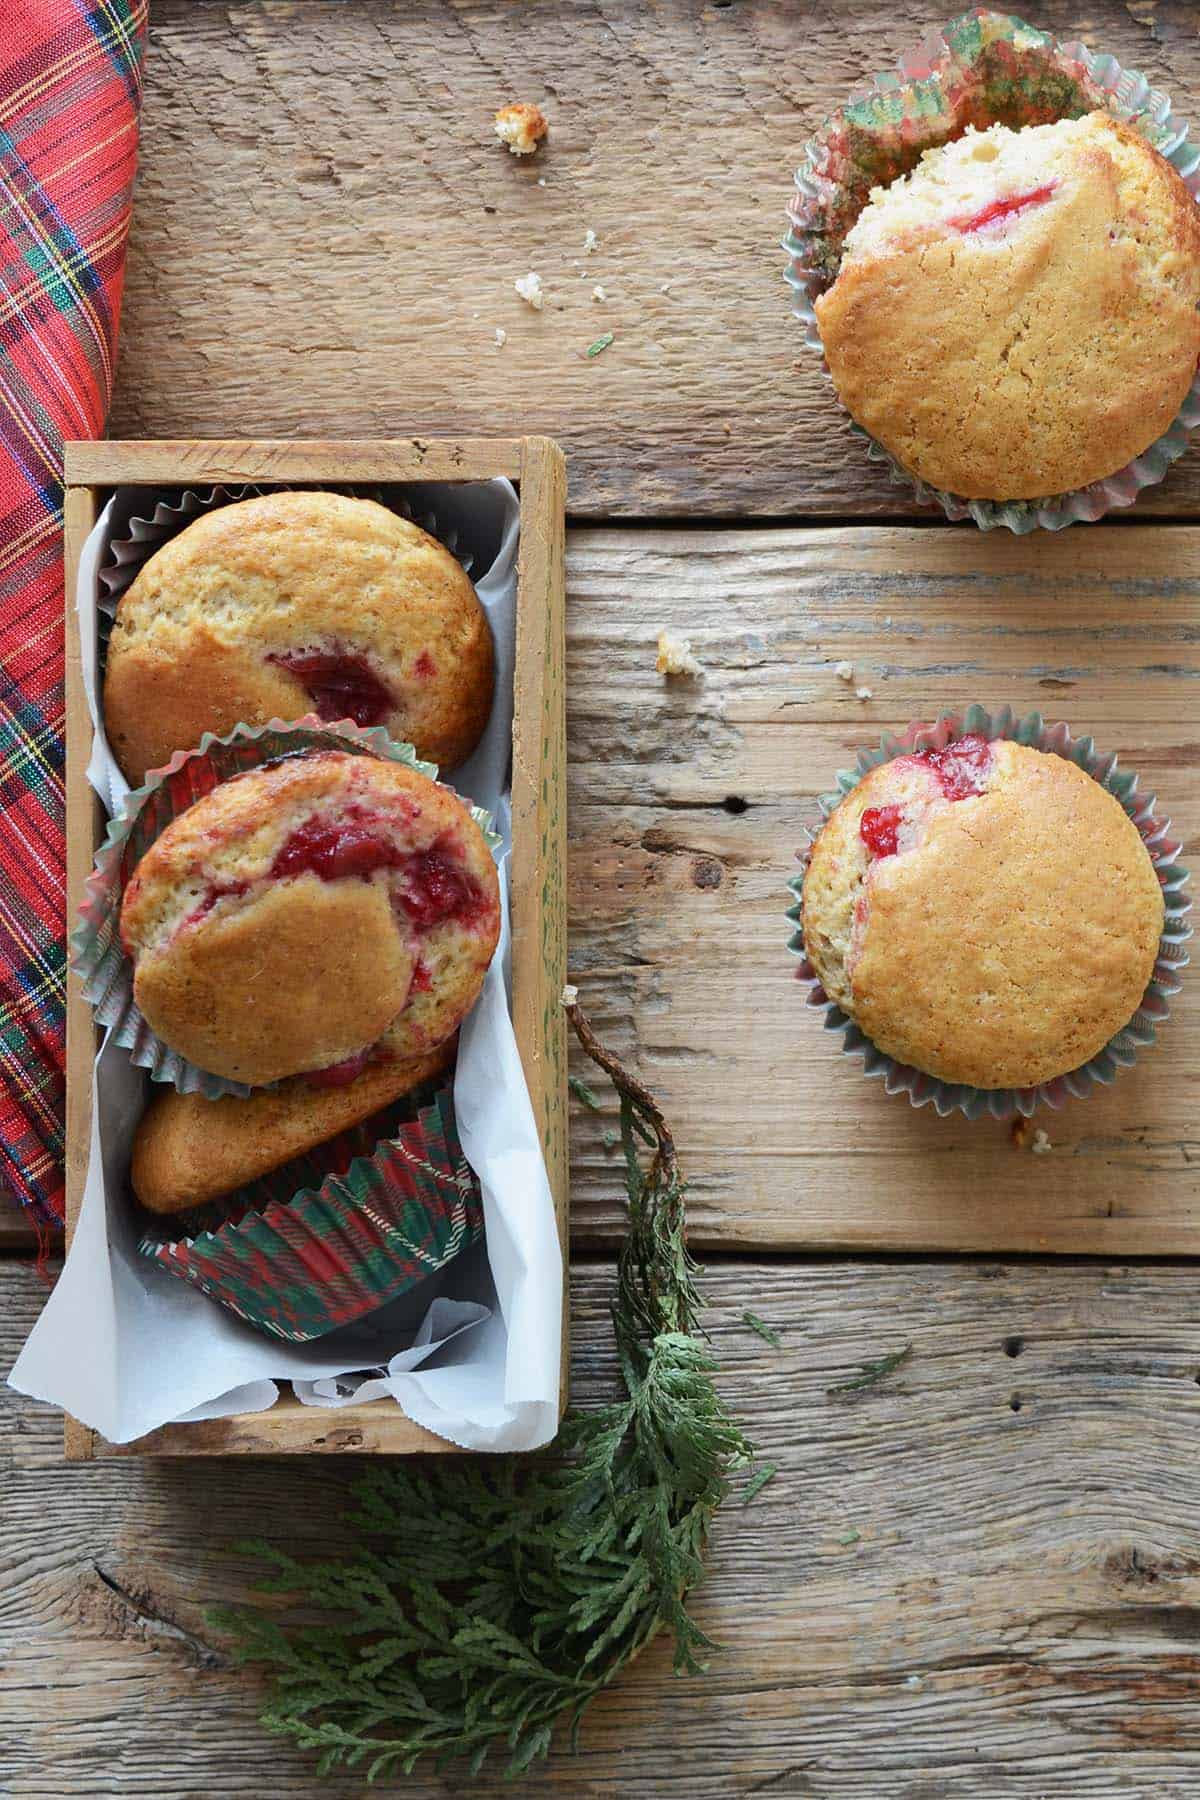 festive eggnog muffins with cranberry sauce on wooden table